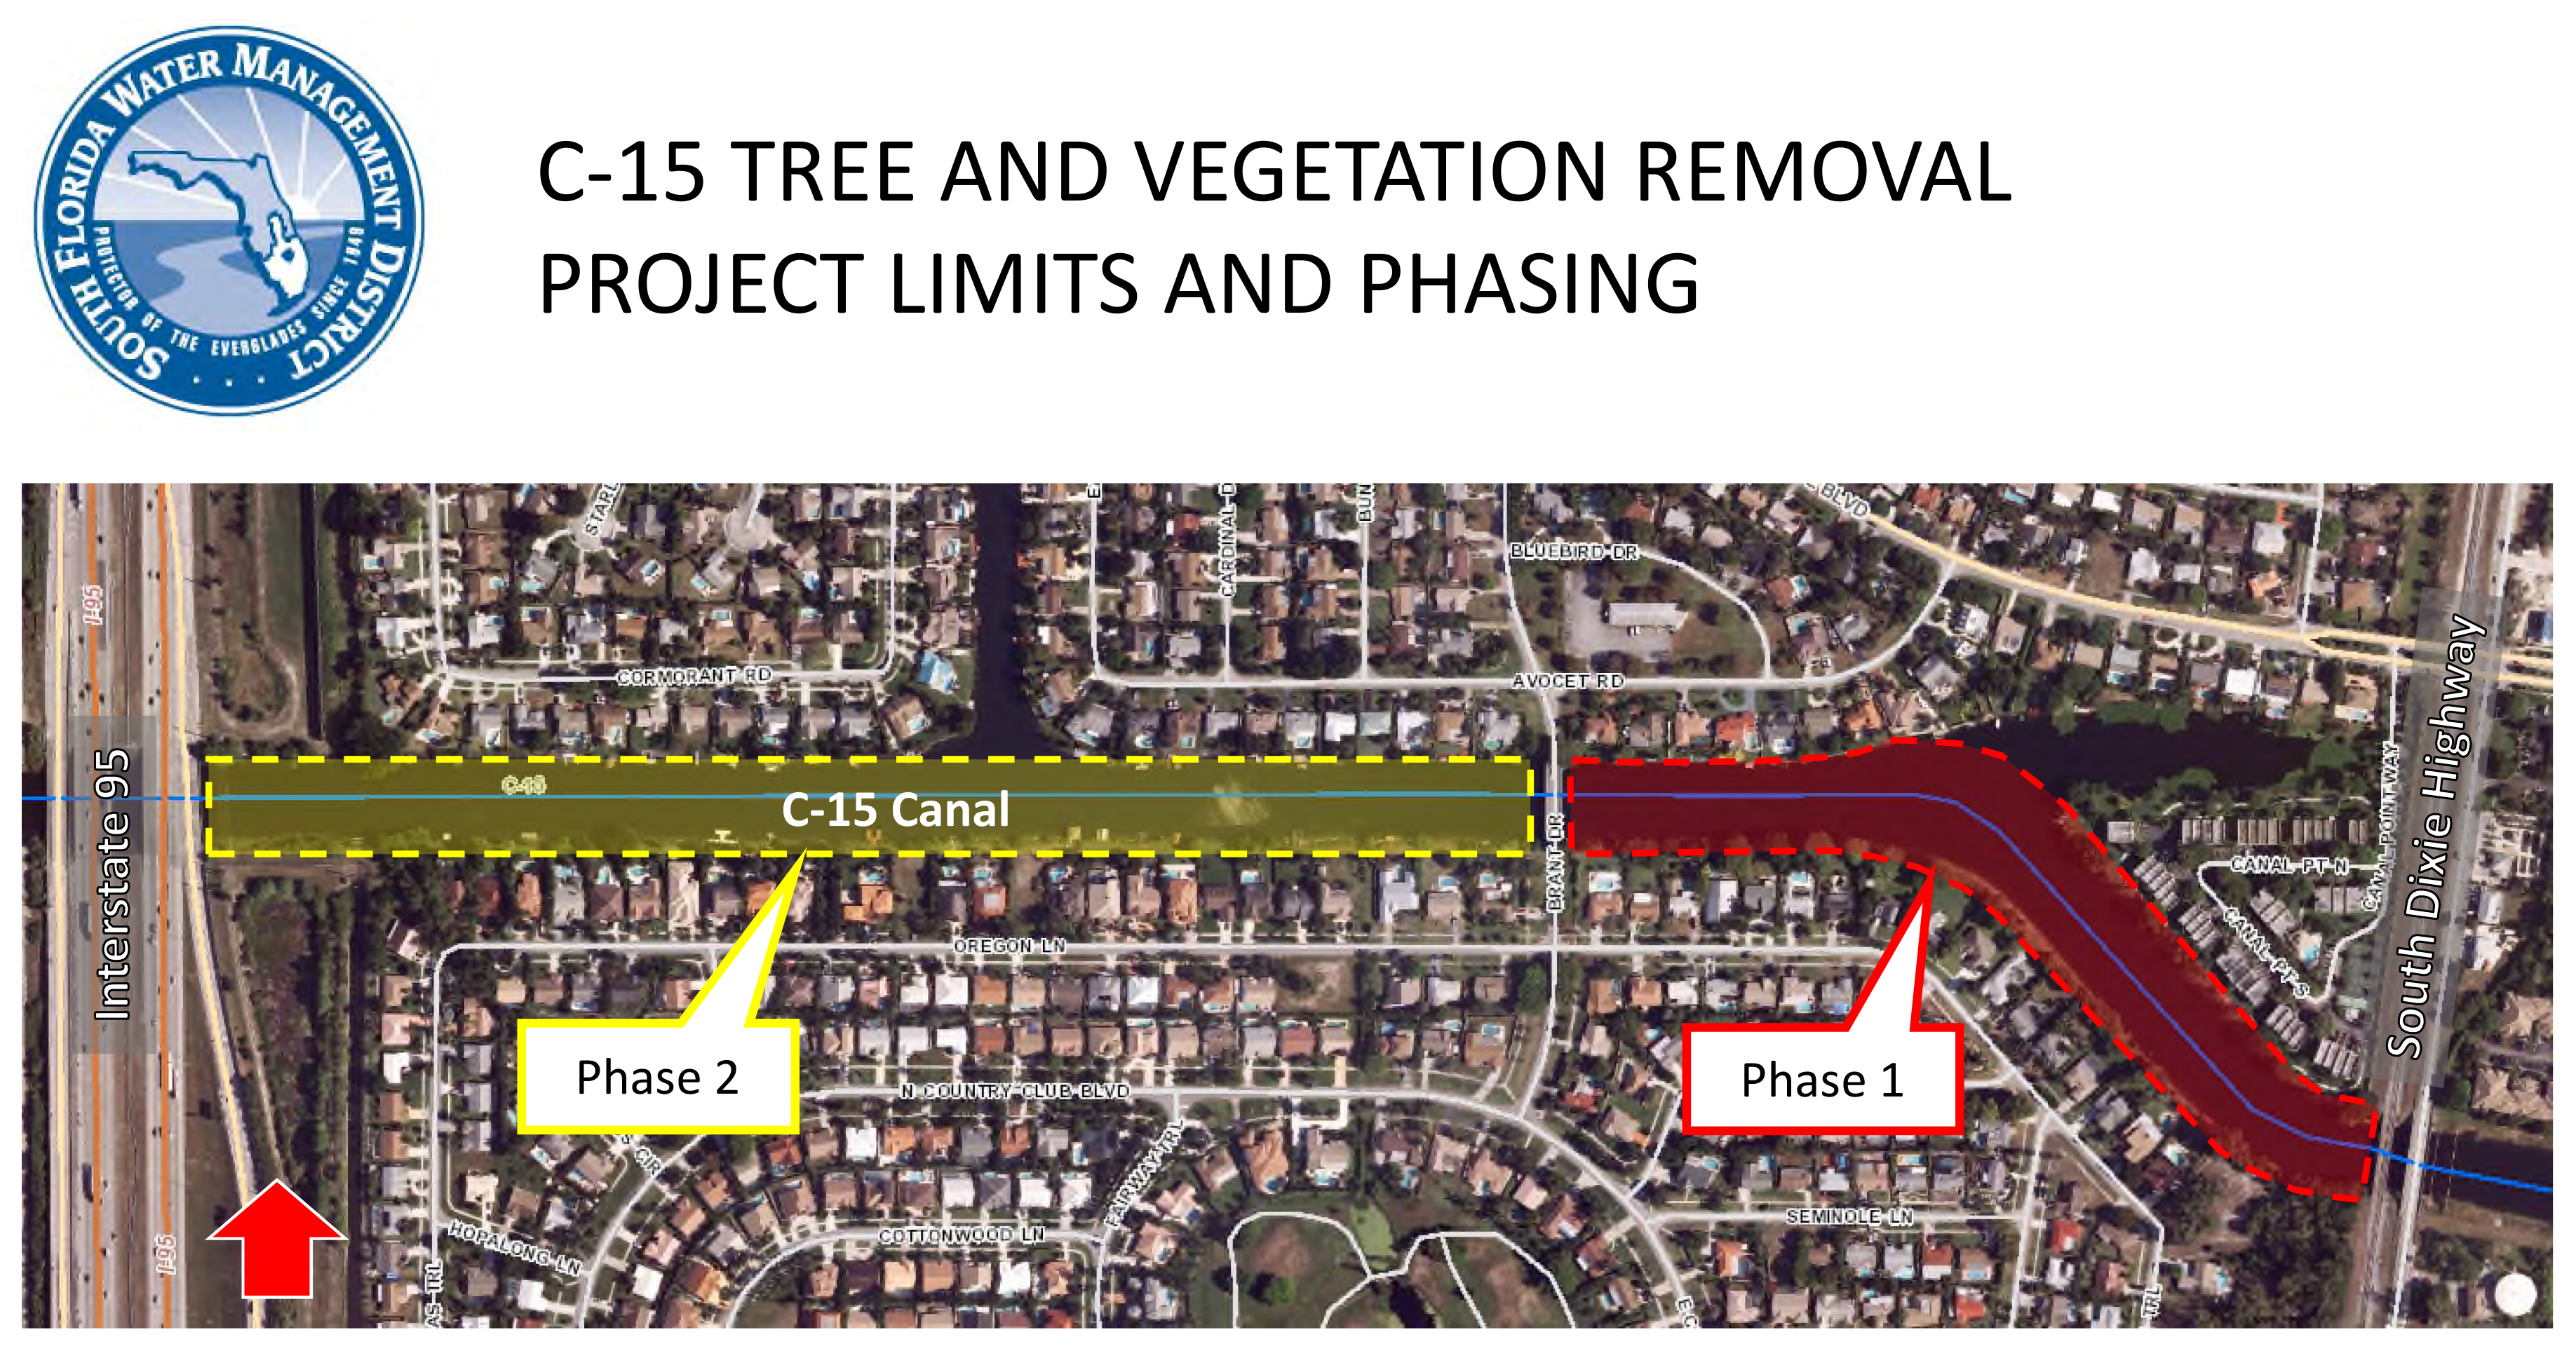 MAP: C-15 Canal and Tree Vegetation Removal Project